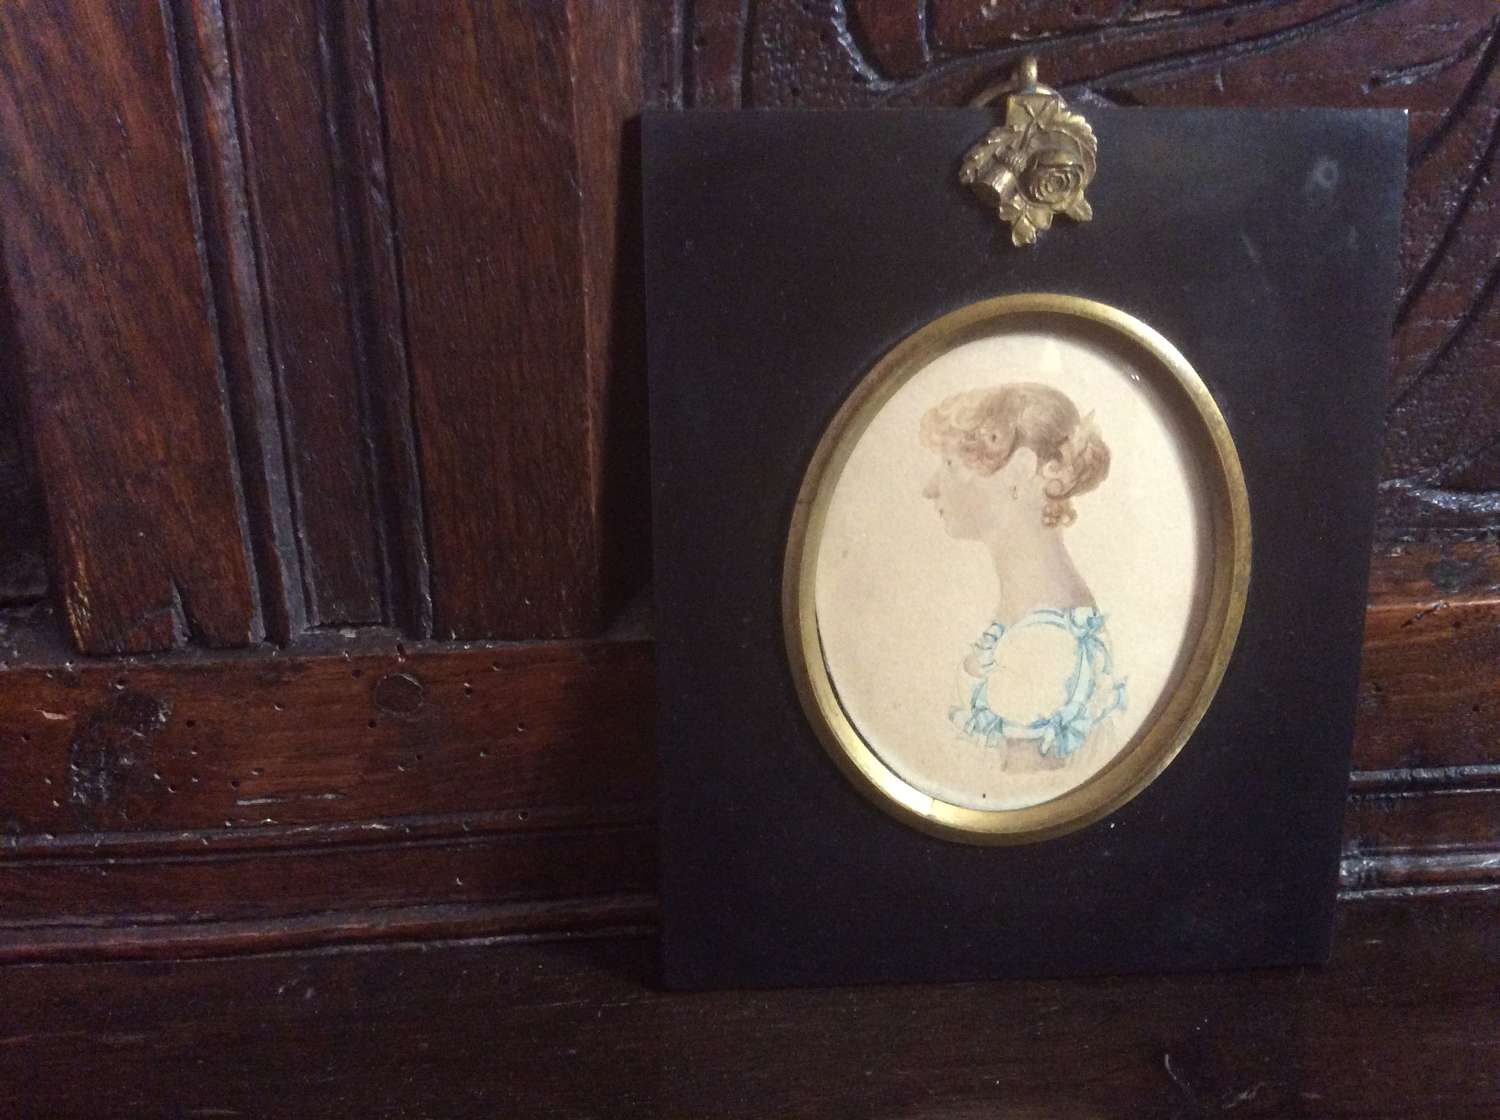 Regency period portrait miniature of a lady with blue ribbons